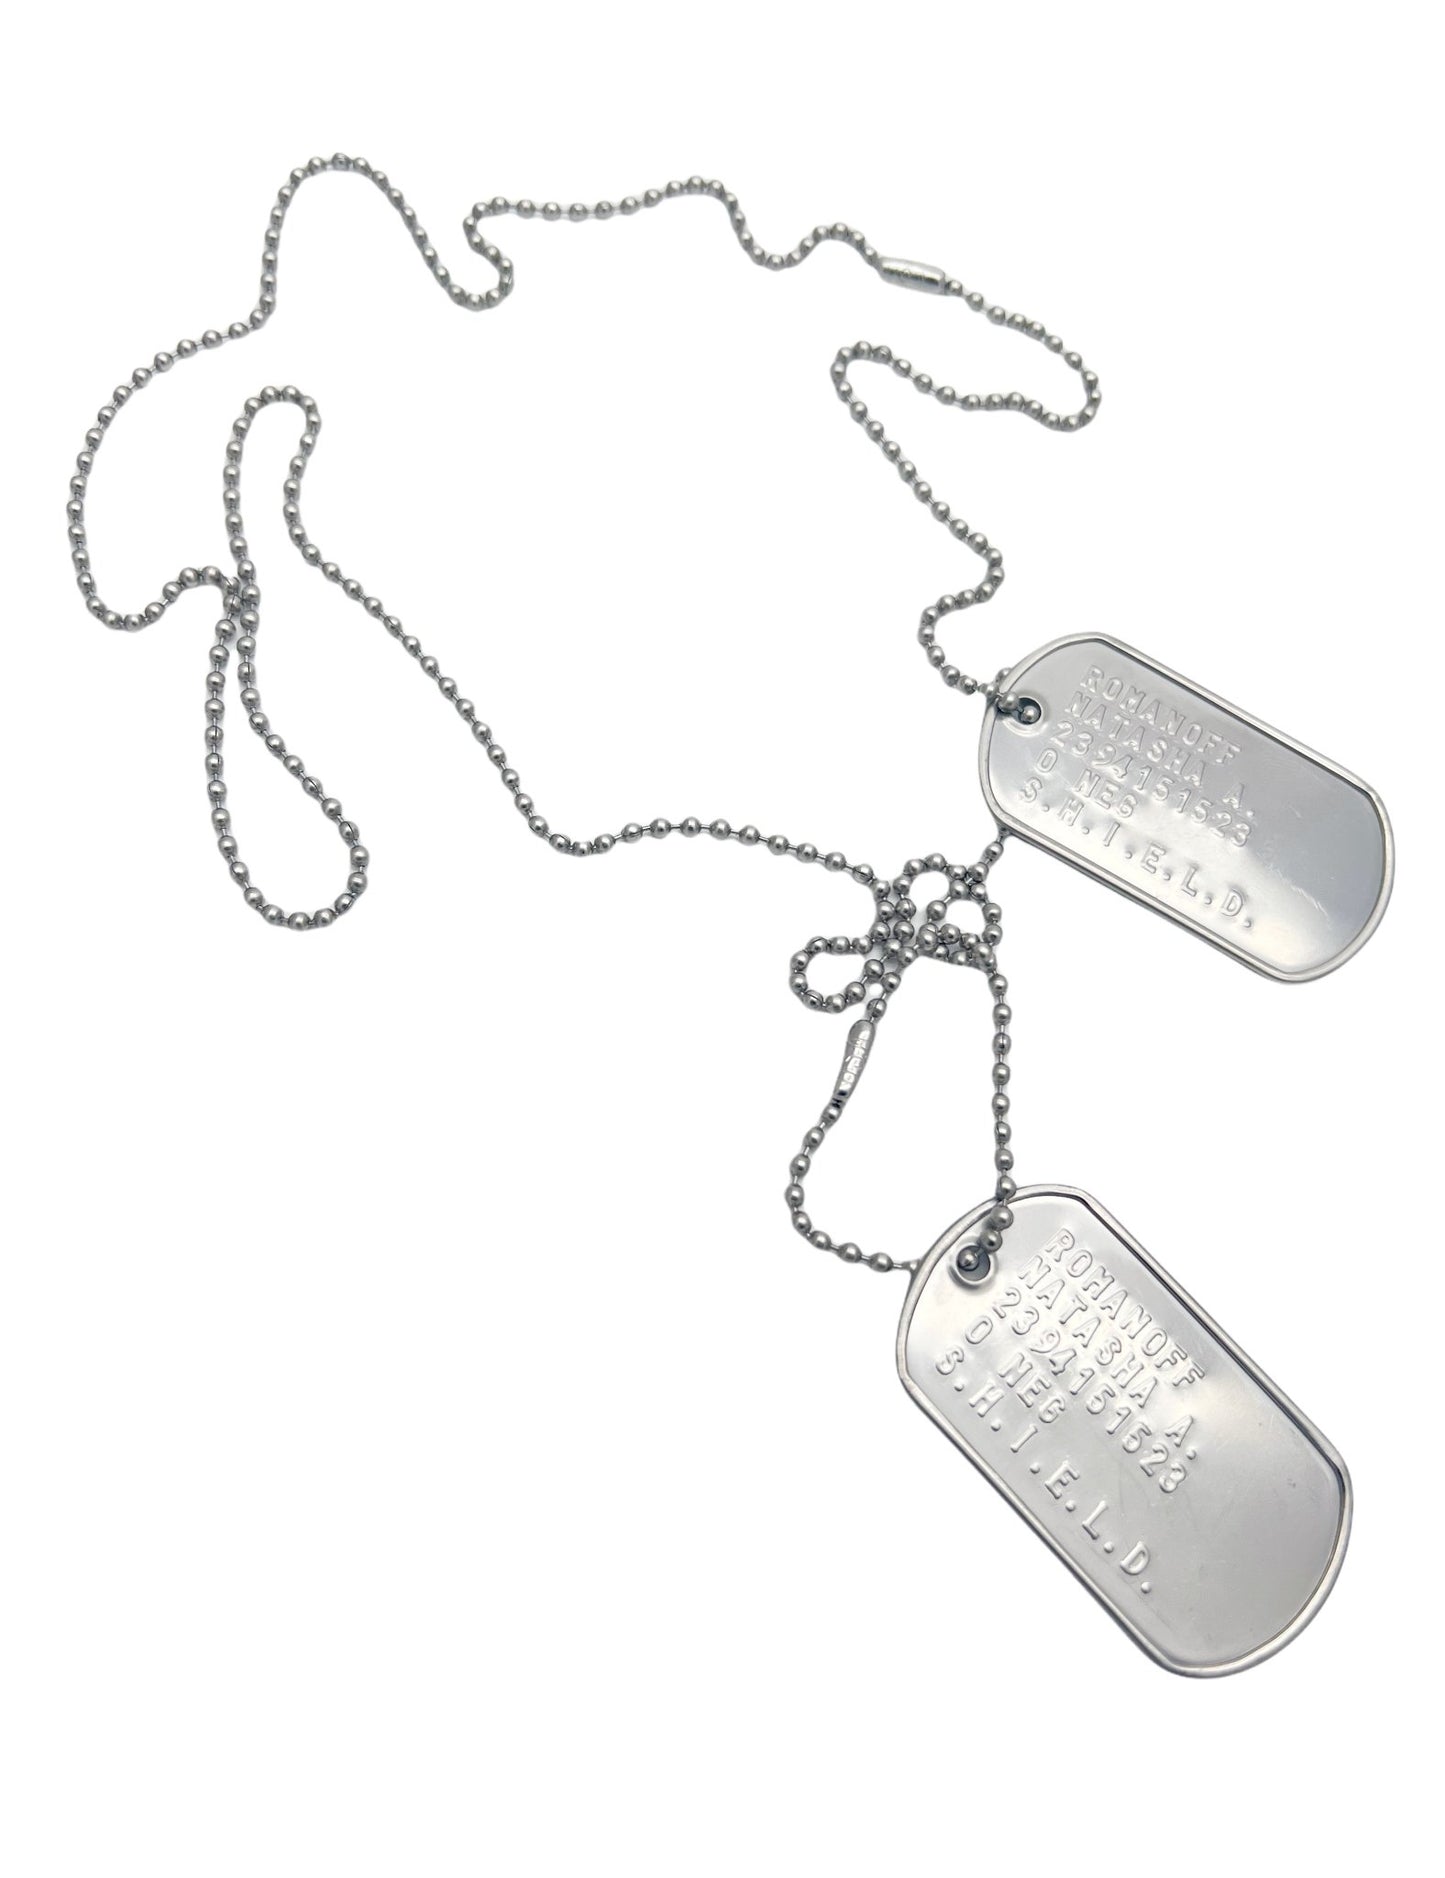 Natasha Romanoff 'BLACK WIDOW' Military Dog Tags - Costume Cosplay Prop Replica- Stainless Steel Chains Included - TheDogTagCo